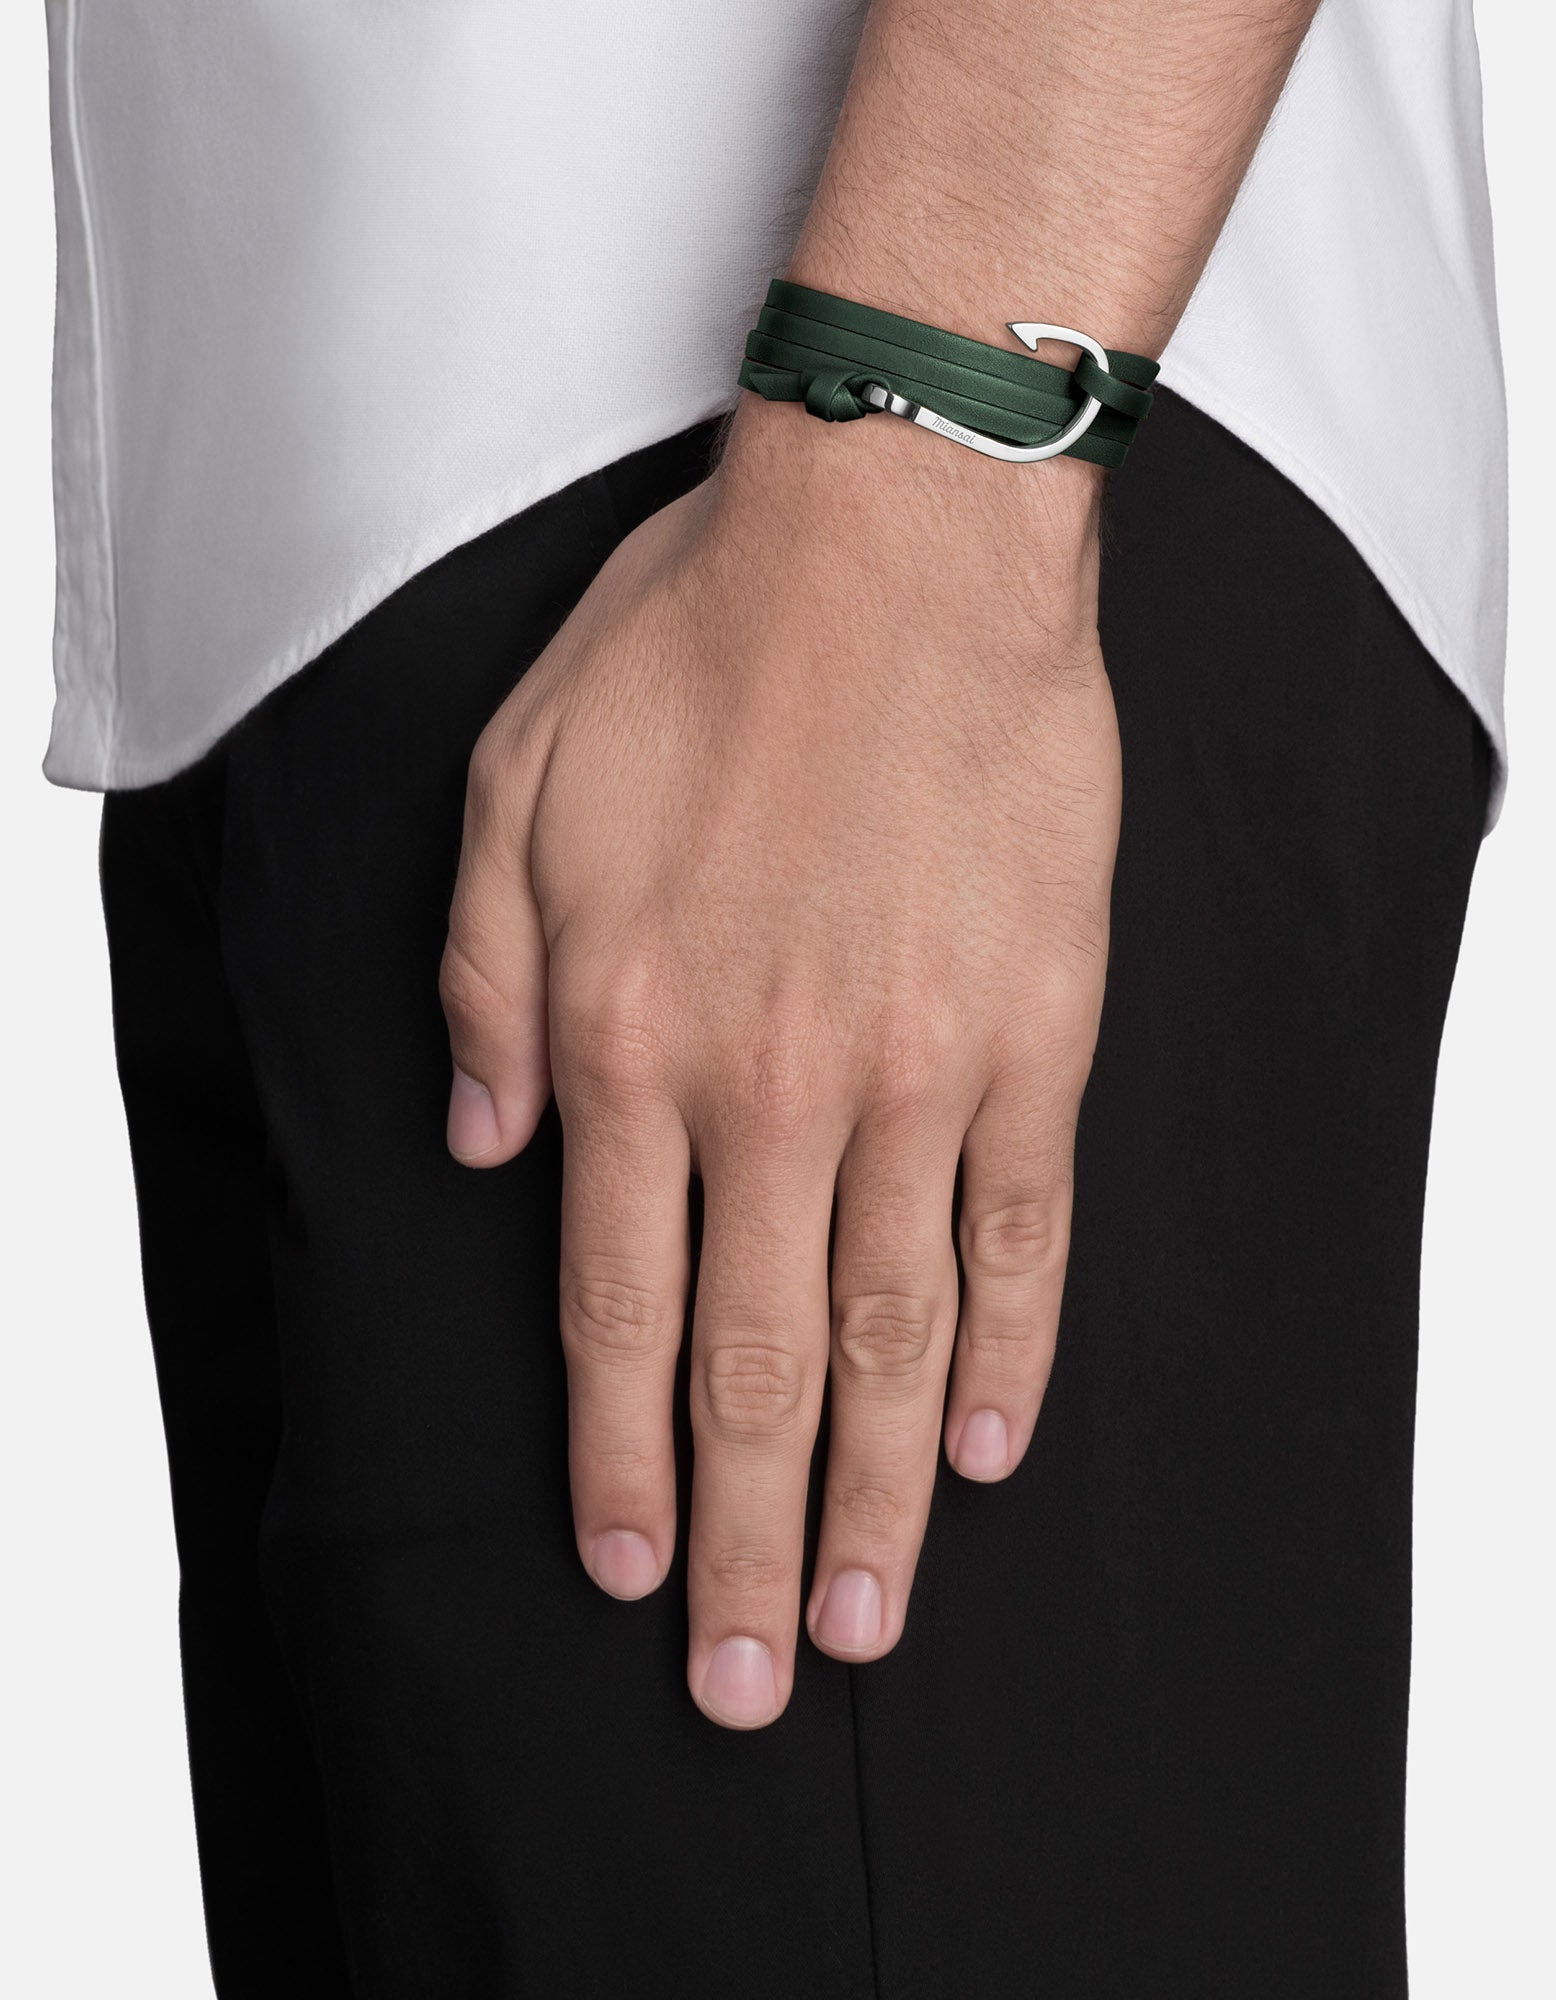 Hook on Leather VERDE
The Hook on Leather Bracelet features our signature maritime grade nylon rope and is secured with a polished silver hook. This classic Miansai go to is a summer essential that is the perfect way to give your look an elevated aesthetic. MIANSAI